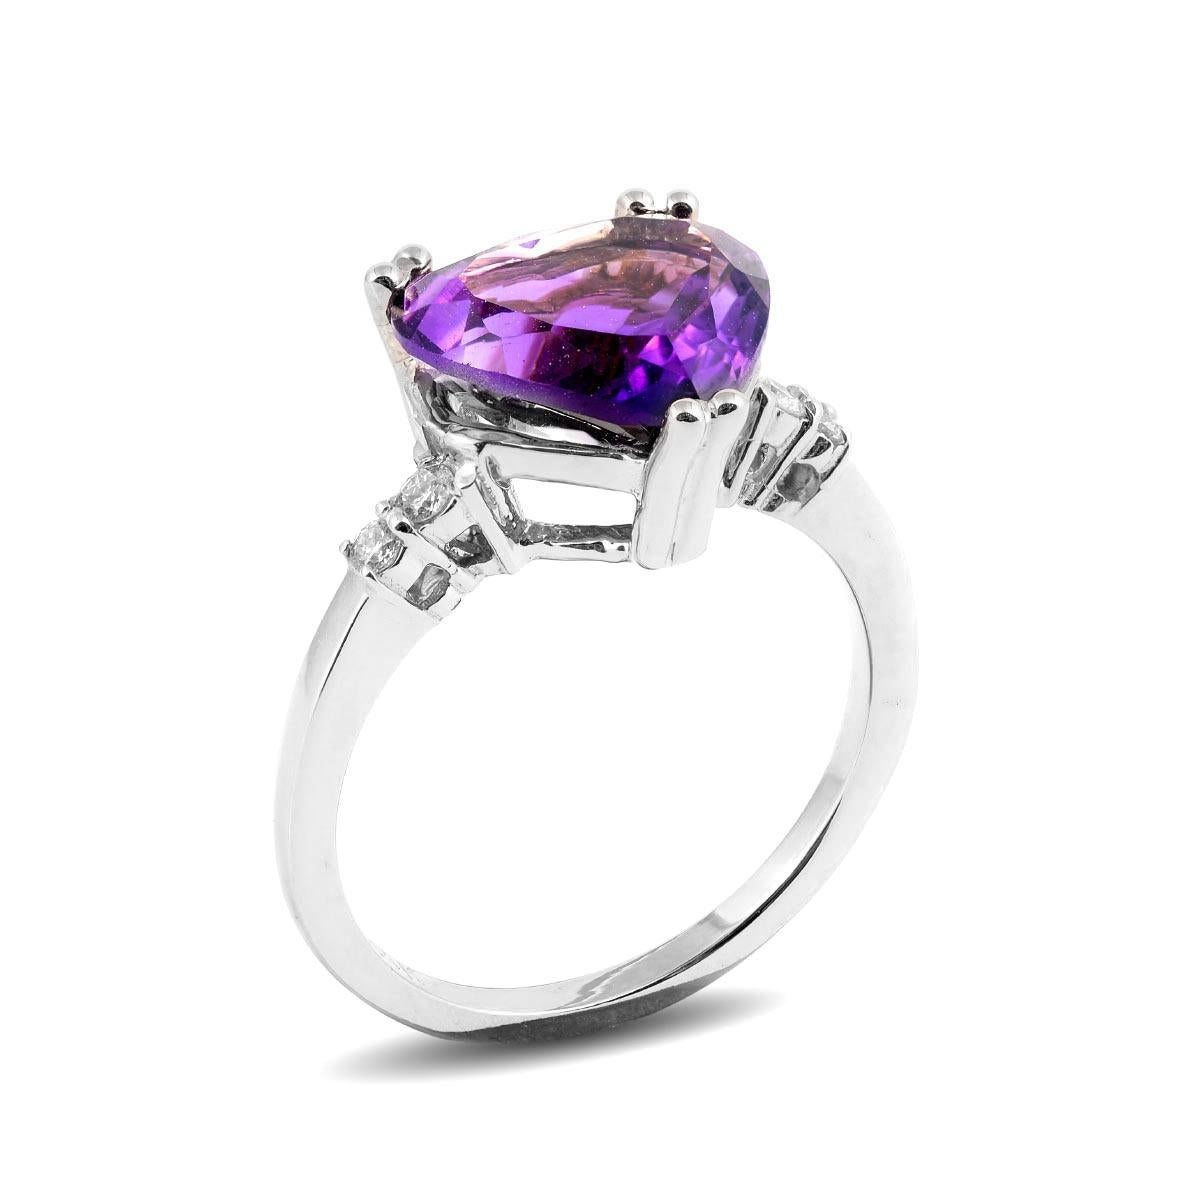 The Amethyst is a gem that offers a spiritual association. This ring showcasing a vibrant 2.95 carat heart, the aubergine stunner is one that is a regal choice for an engagement ring. Paired with diamonds that can be associated to purity, this is